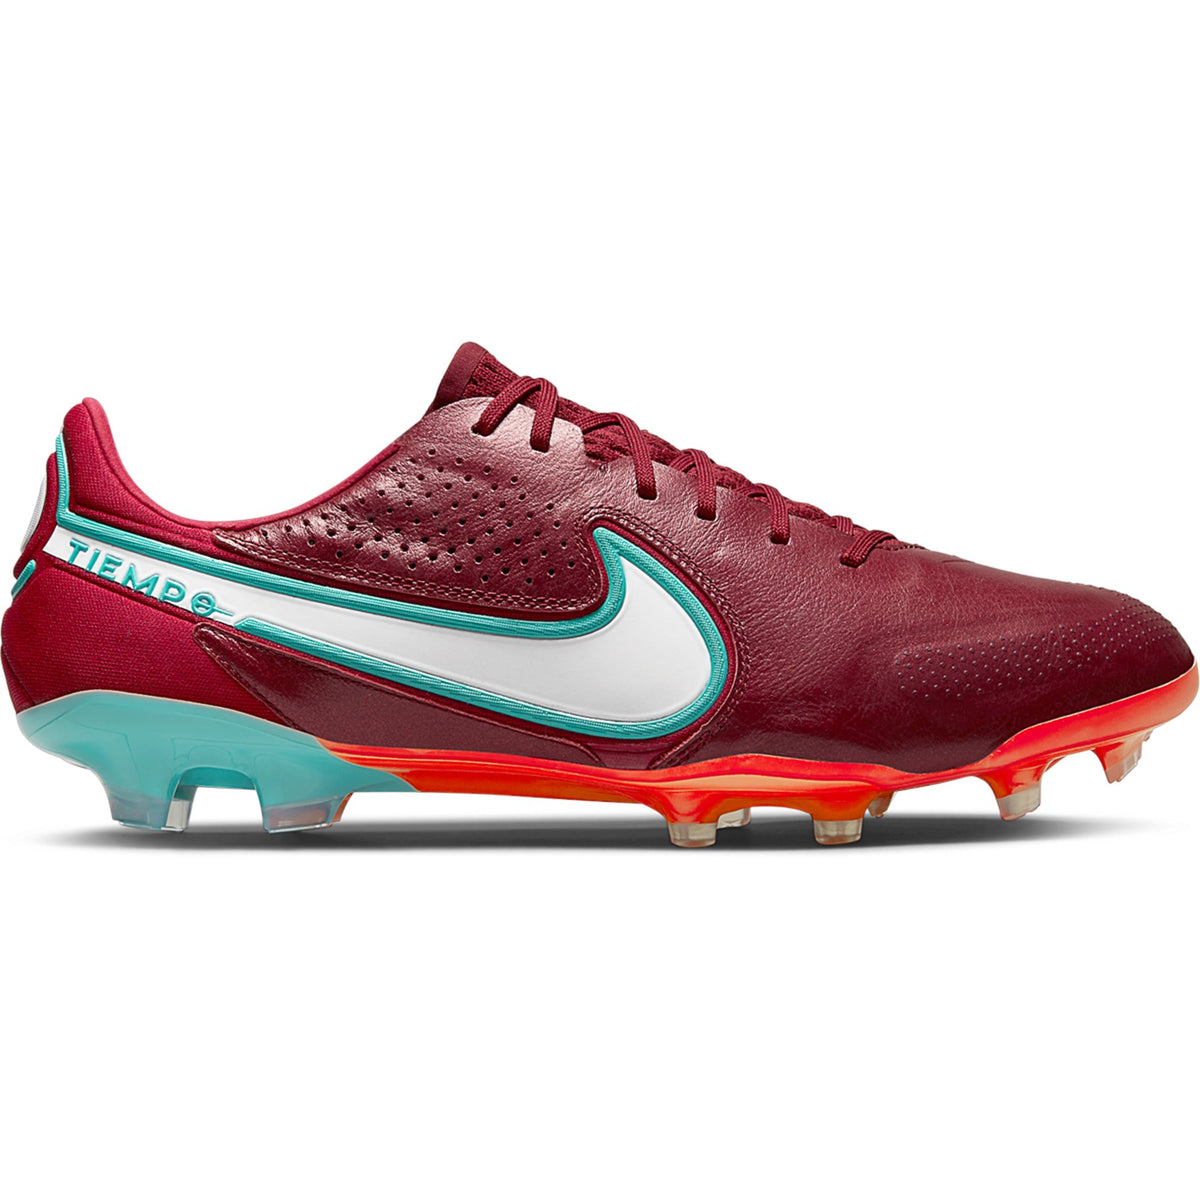 Nike Tiempo Elite FG Firm Ground Soccer Cleat Team Hibiscus/Bright Crimson/Dynamic Turquoise CZ8482-616 – Soccer Zone USA